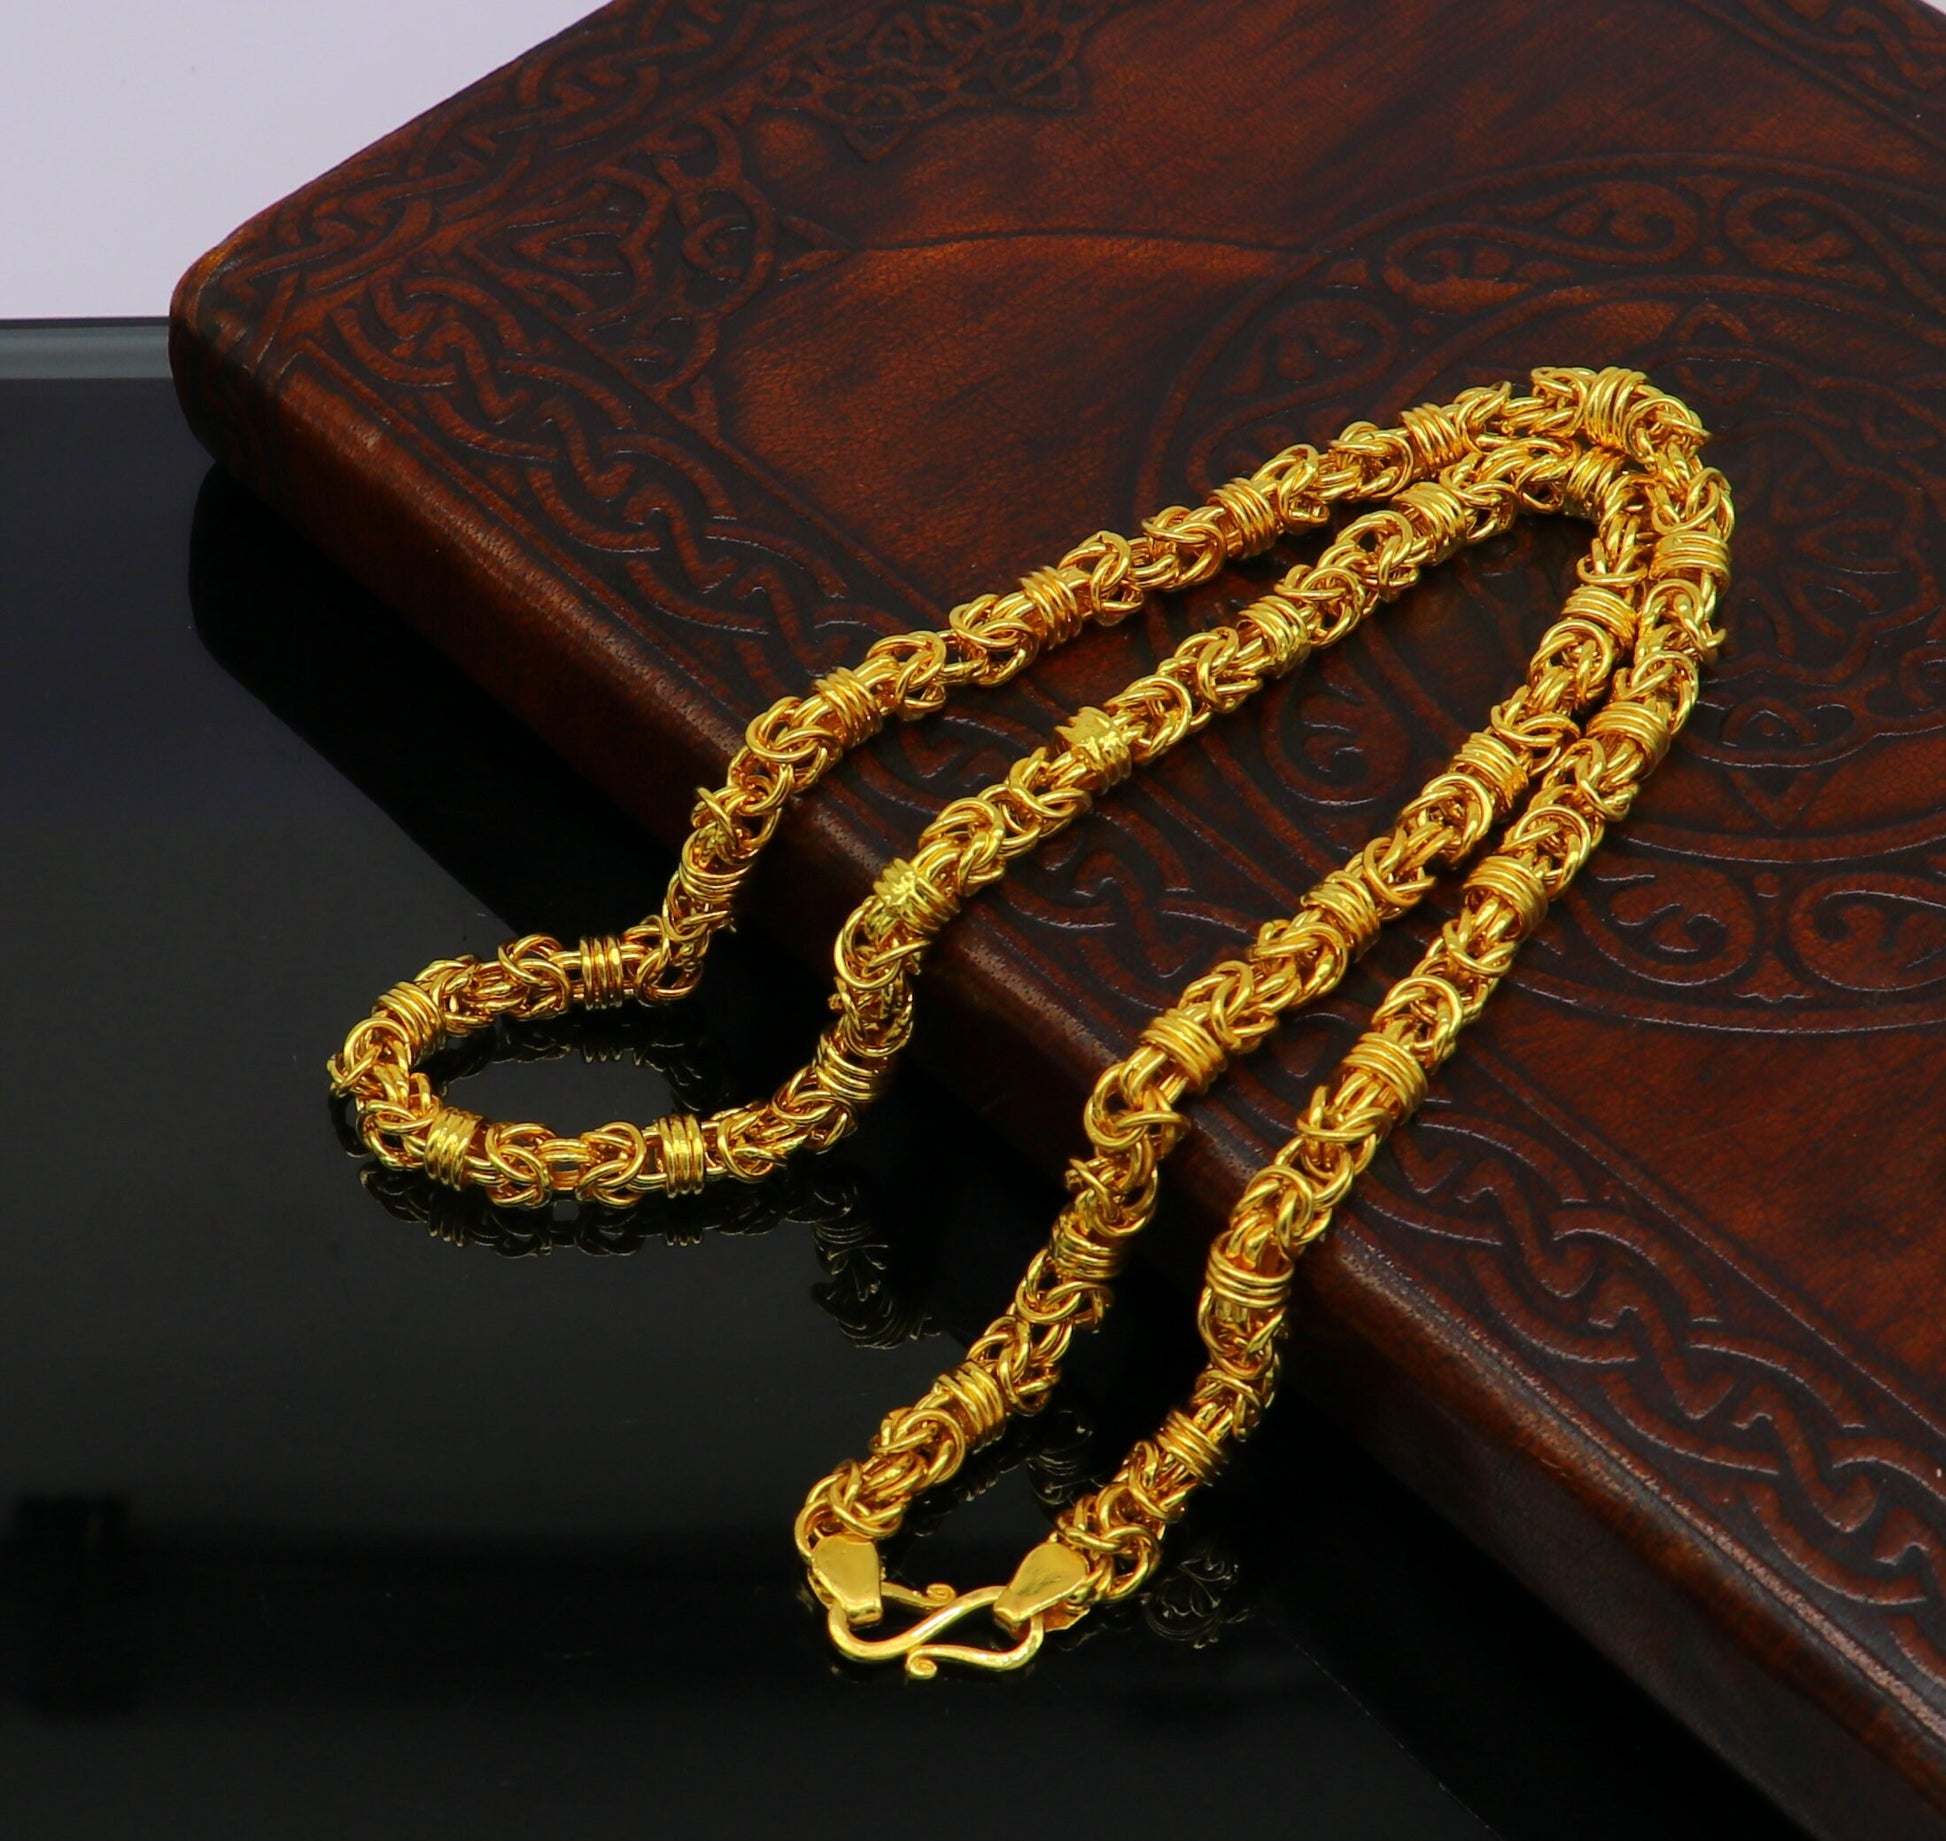 22kt yellow gold handmade exclusive byzantine chain, amazing fancy stylish best gifting chain necklace, customized elegant chain ch231 - TRIBAL ORNAMENTS